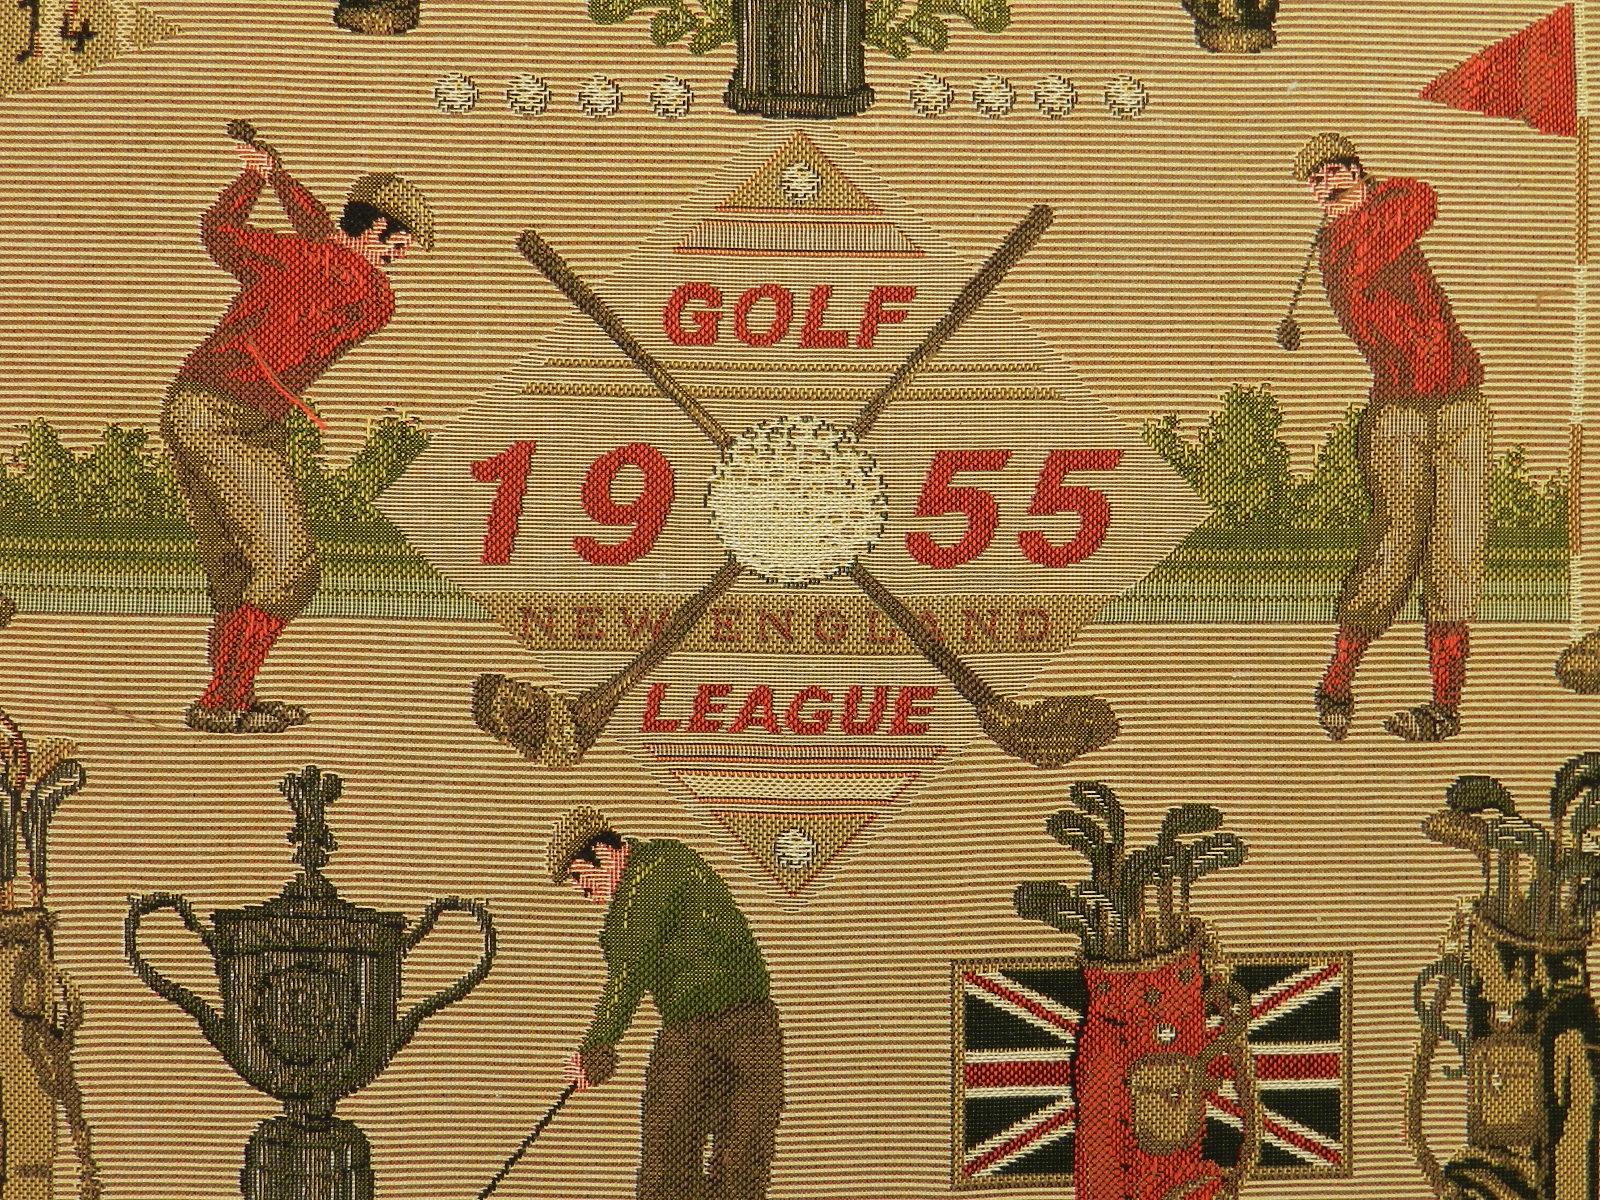 US Open Golf commemorative woven textile picture, 1955
Rare find
Fabric wall hanging now mounted on to wool backing and on to board
US Open Cup 1947 memorabilia for 1955 New England League US and UK Golf competition
Very good vintage condition